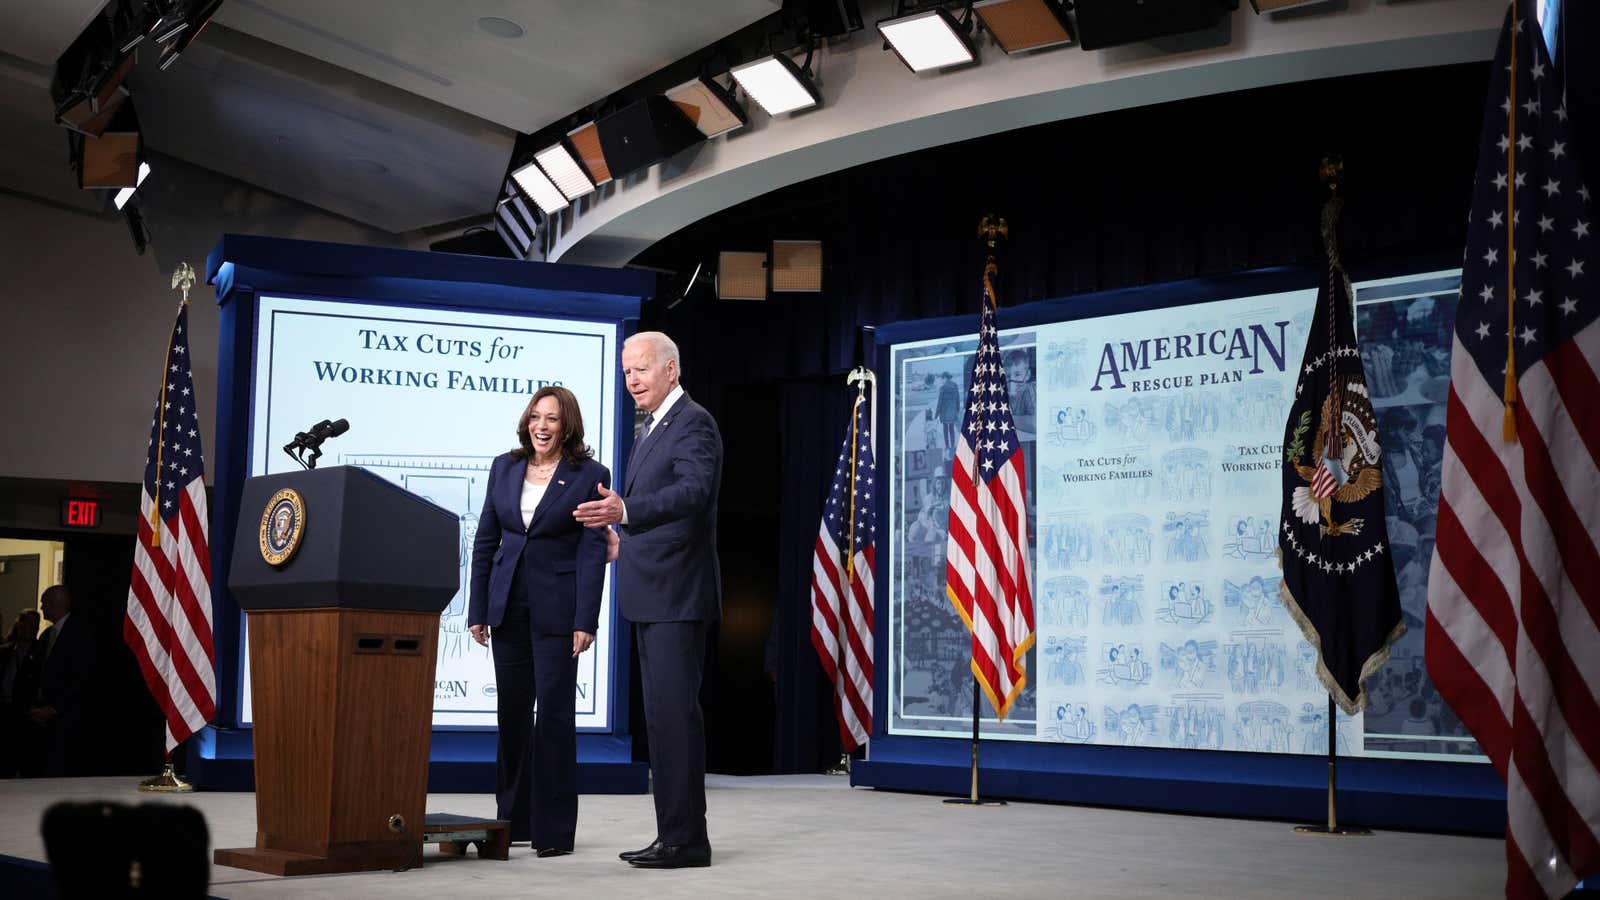 US President Joe Biden and Vice President Kamala Harris react to audience members ahead of their remarks about Child Tax Credit tax relief payments during a speech in the Eisenhower Executive Office Building’s South Court Auditorium at the White House in Washington, U.S., July 15, 2021.